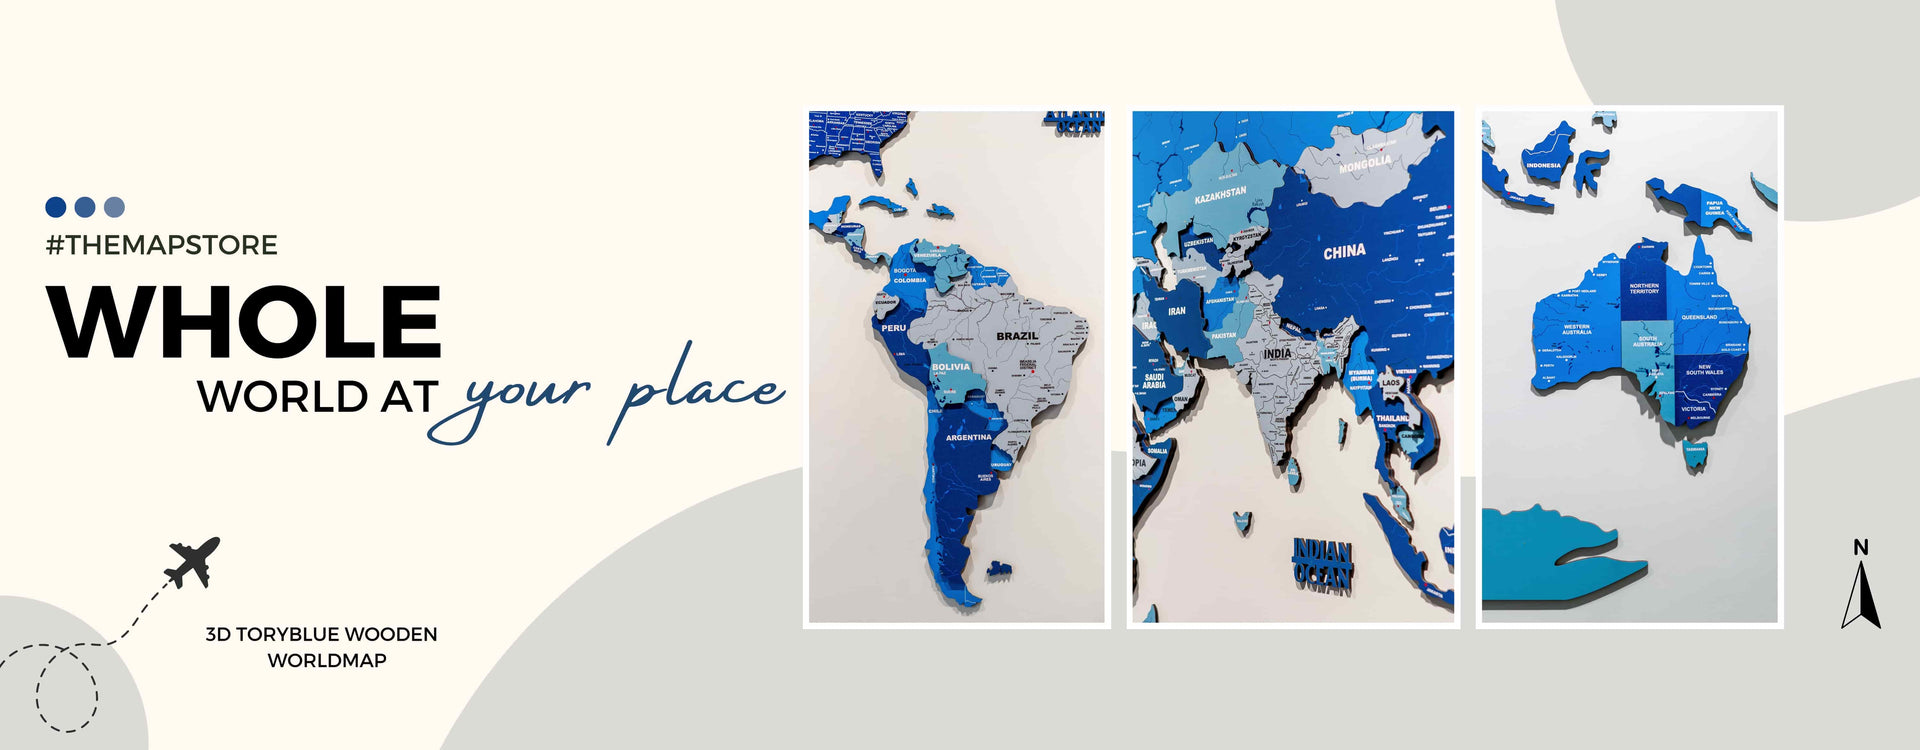 Tory Blue Wooden World Map | The Map Store | Wooden World Map For wall